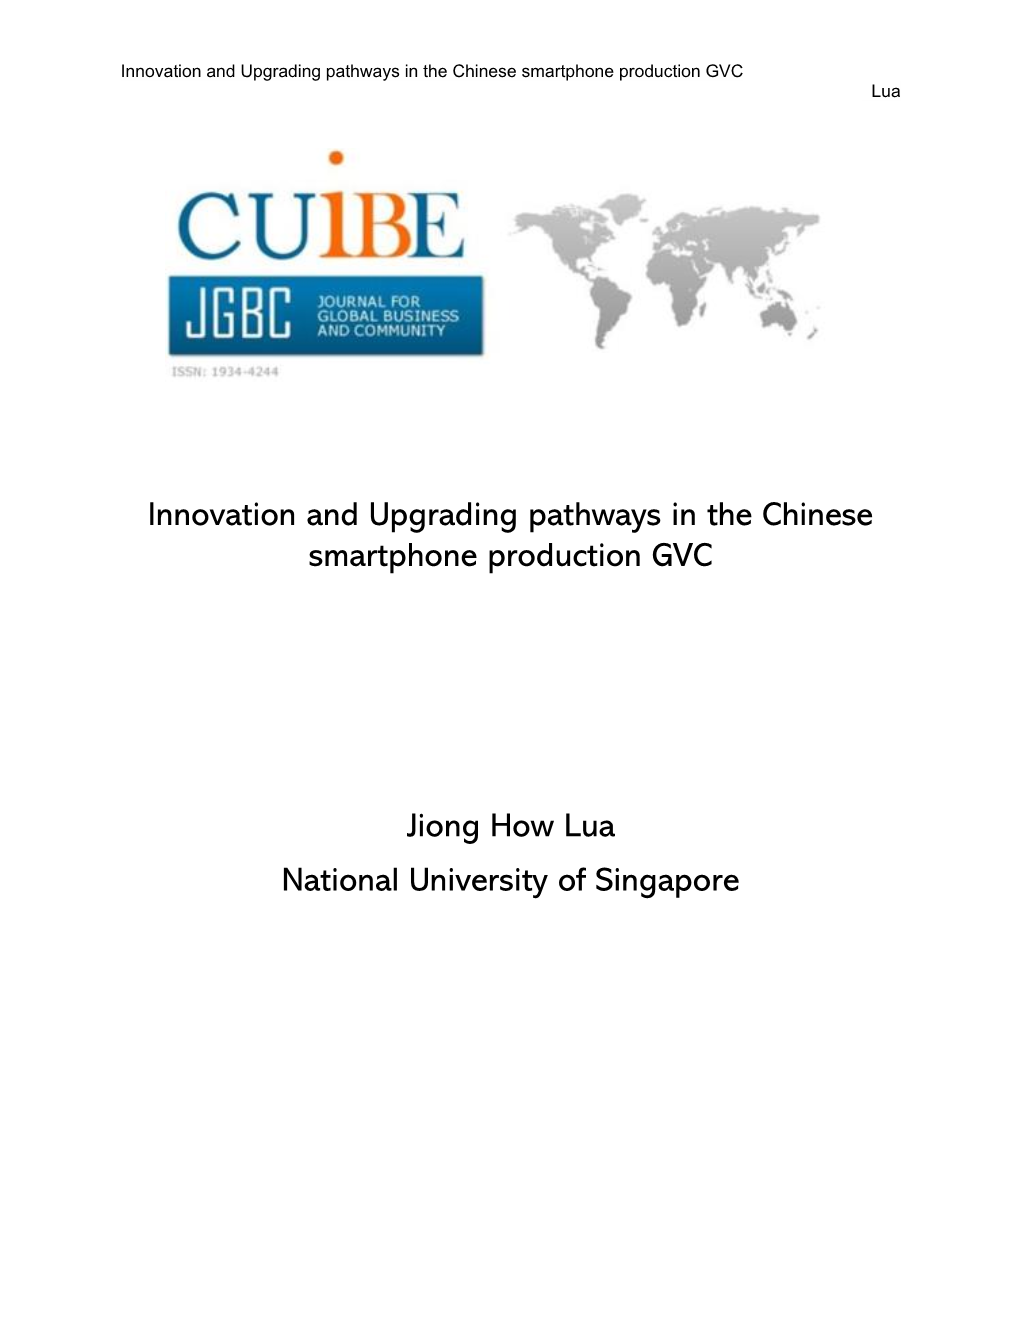 Innovation and Upgrading Pathways in the Chinese Smartphone Production GVC Jiong How Lua National University of Singapore